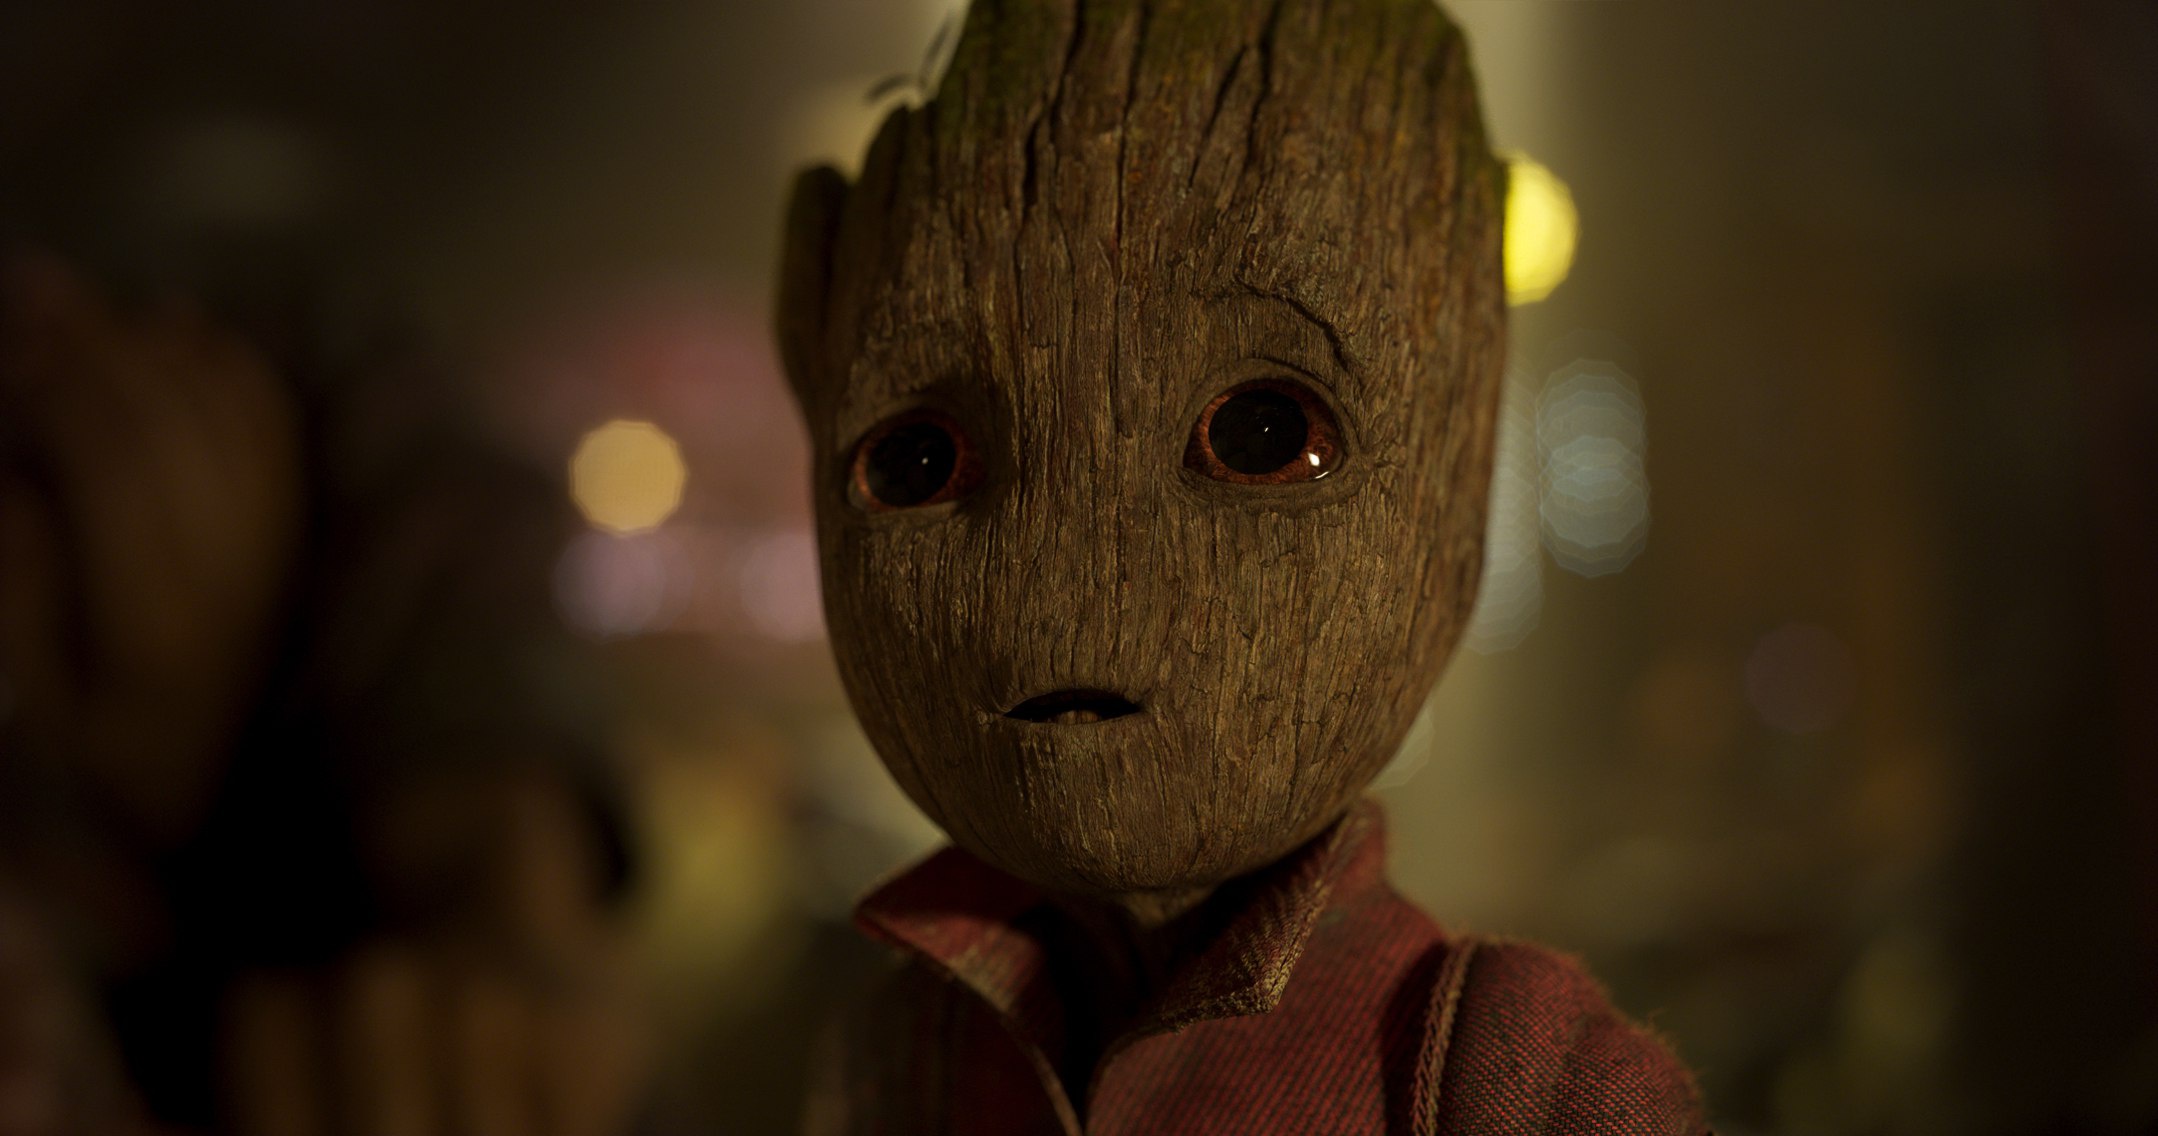 Wallpapers baby Groot guardians of the galaxy movies on the desktop